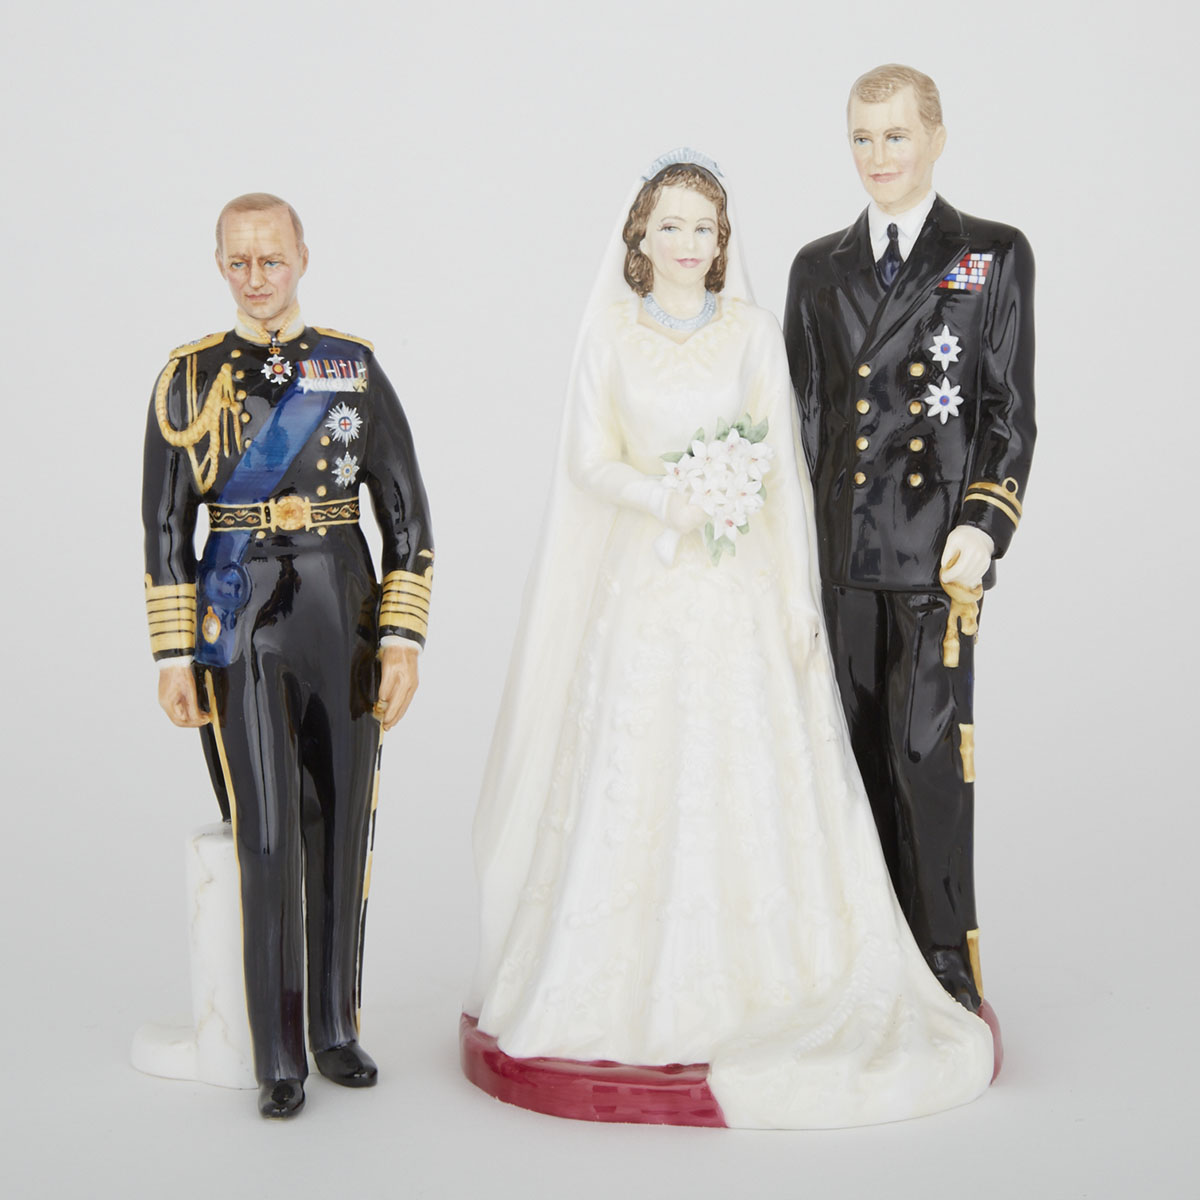 Two Royal Doulton Portrait Figures of H.M. The Queen and H.R.H. Prince Philip, Duke of Edinburgh, c.1981-97